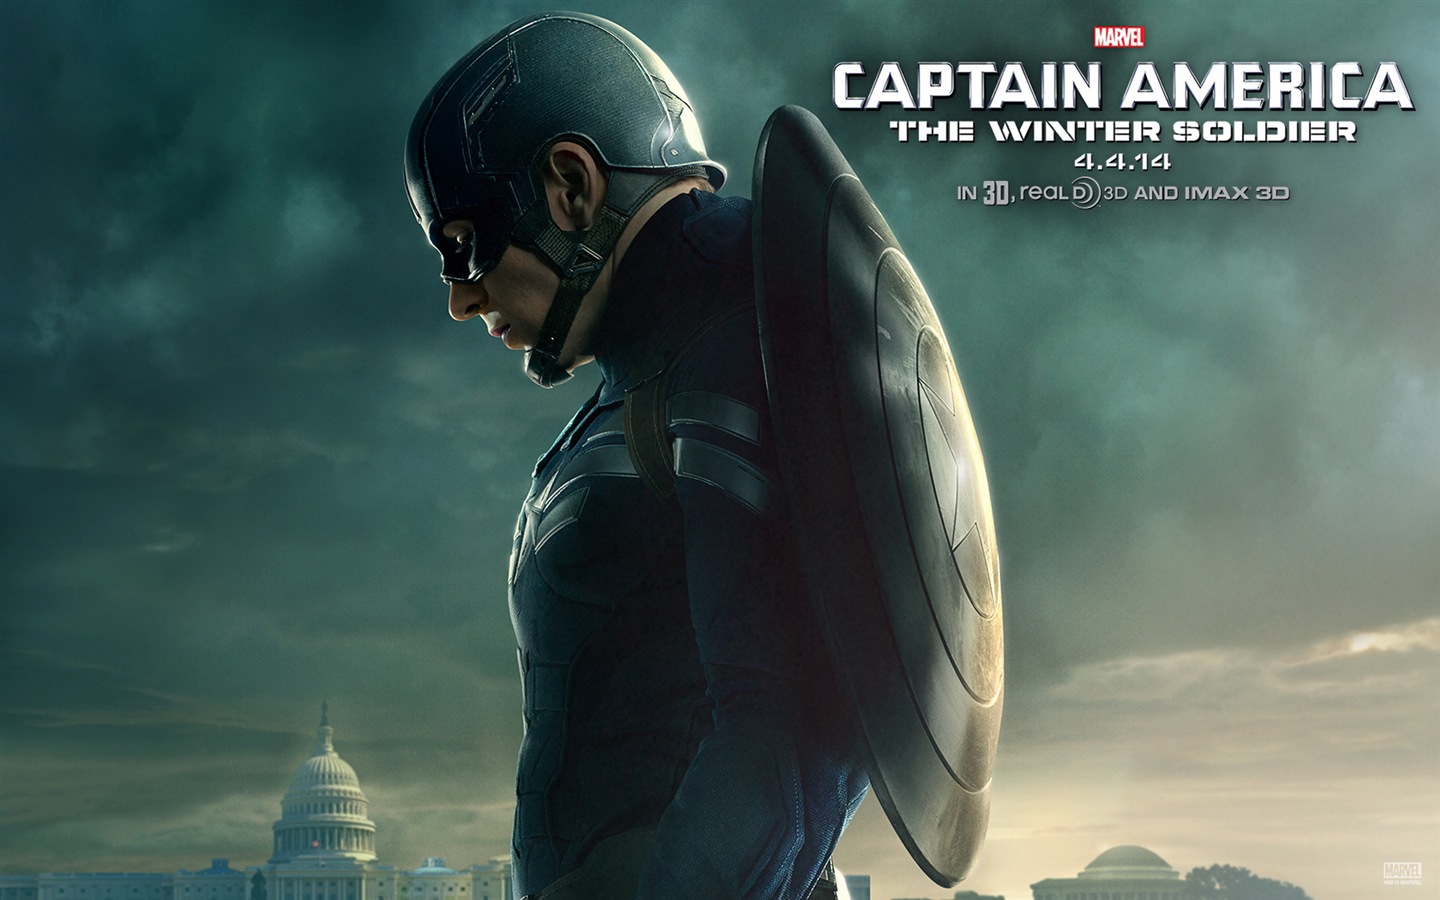 Captain America: The Winter Soldier HD tapety na plochu #7 - 1440x900